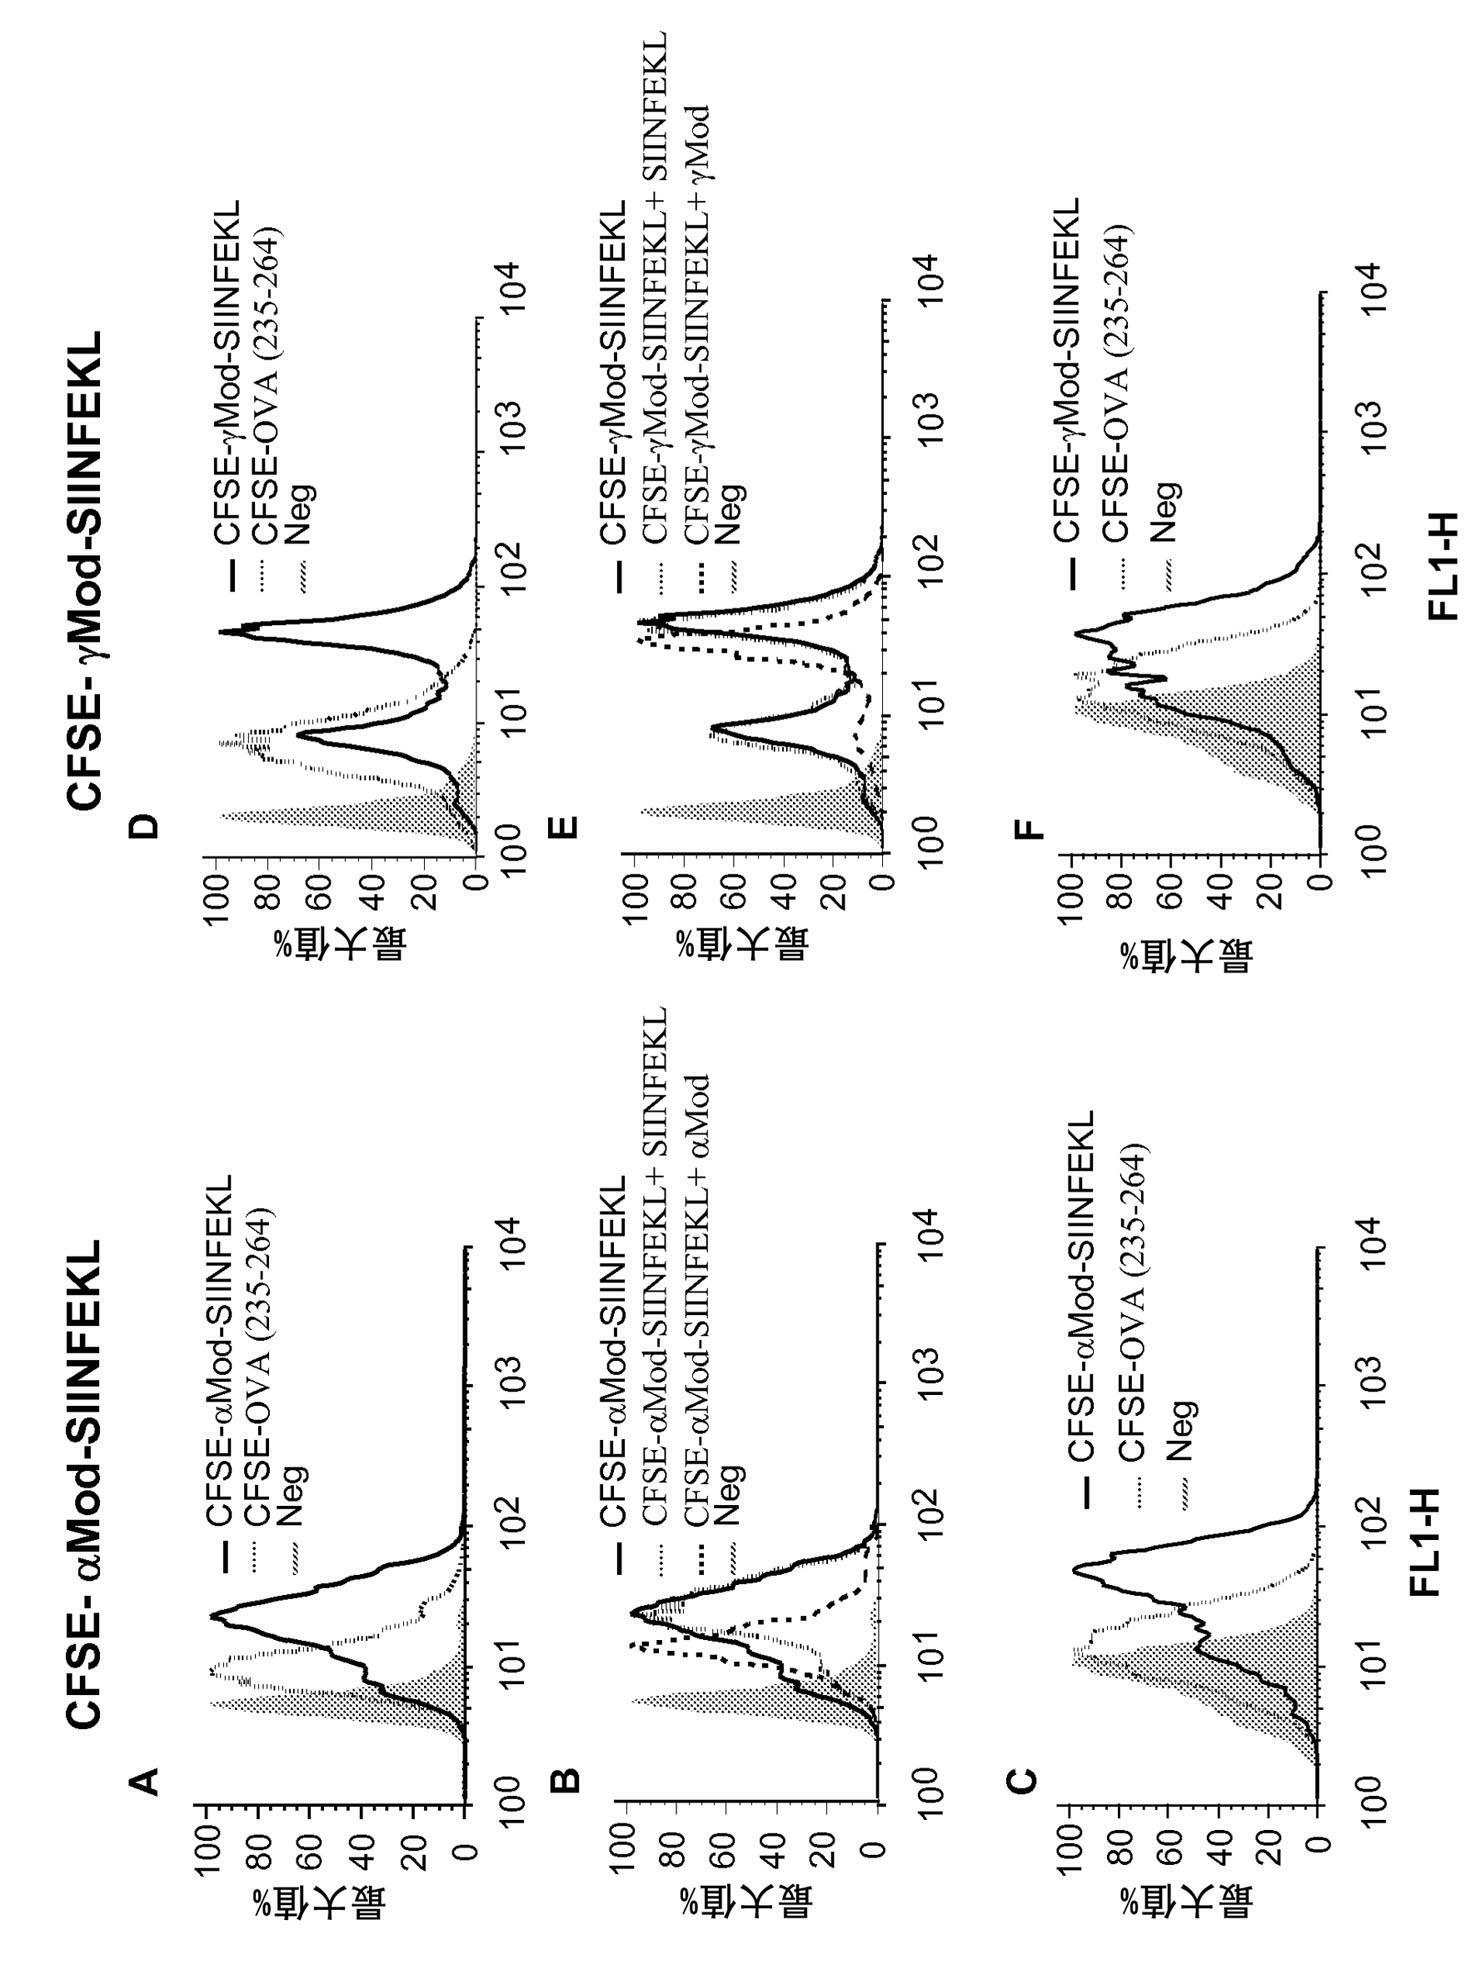 Use of phenol-soluble modulins for vaccine development